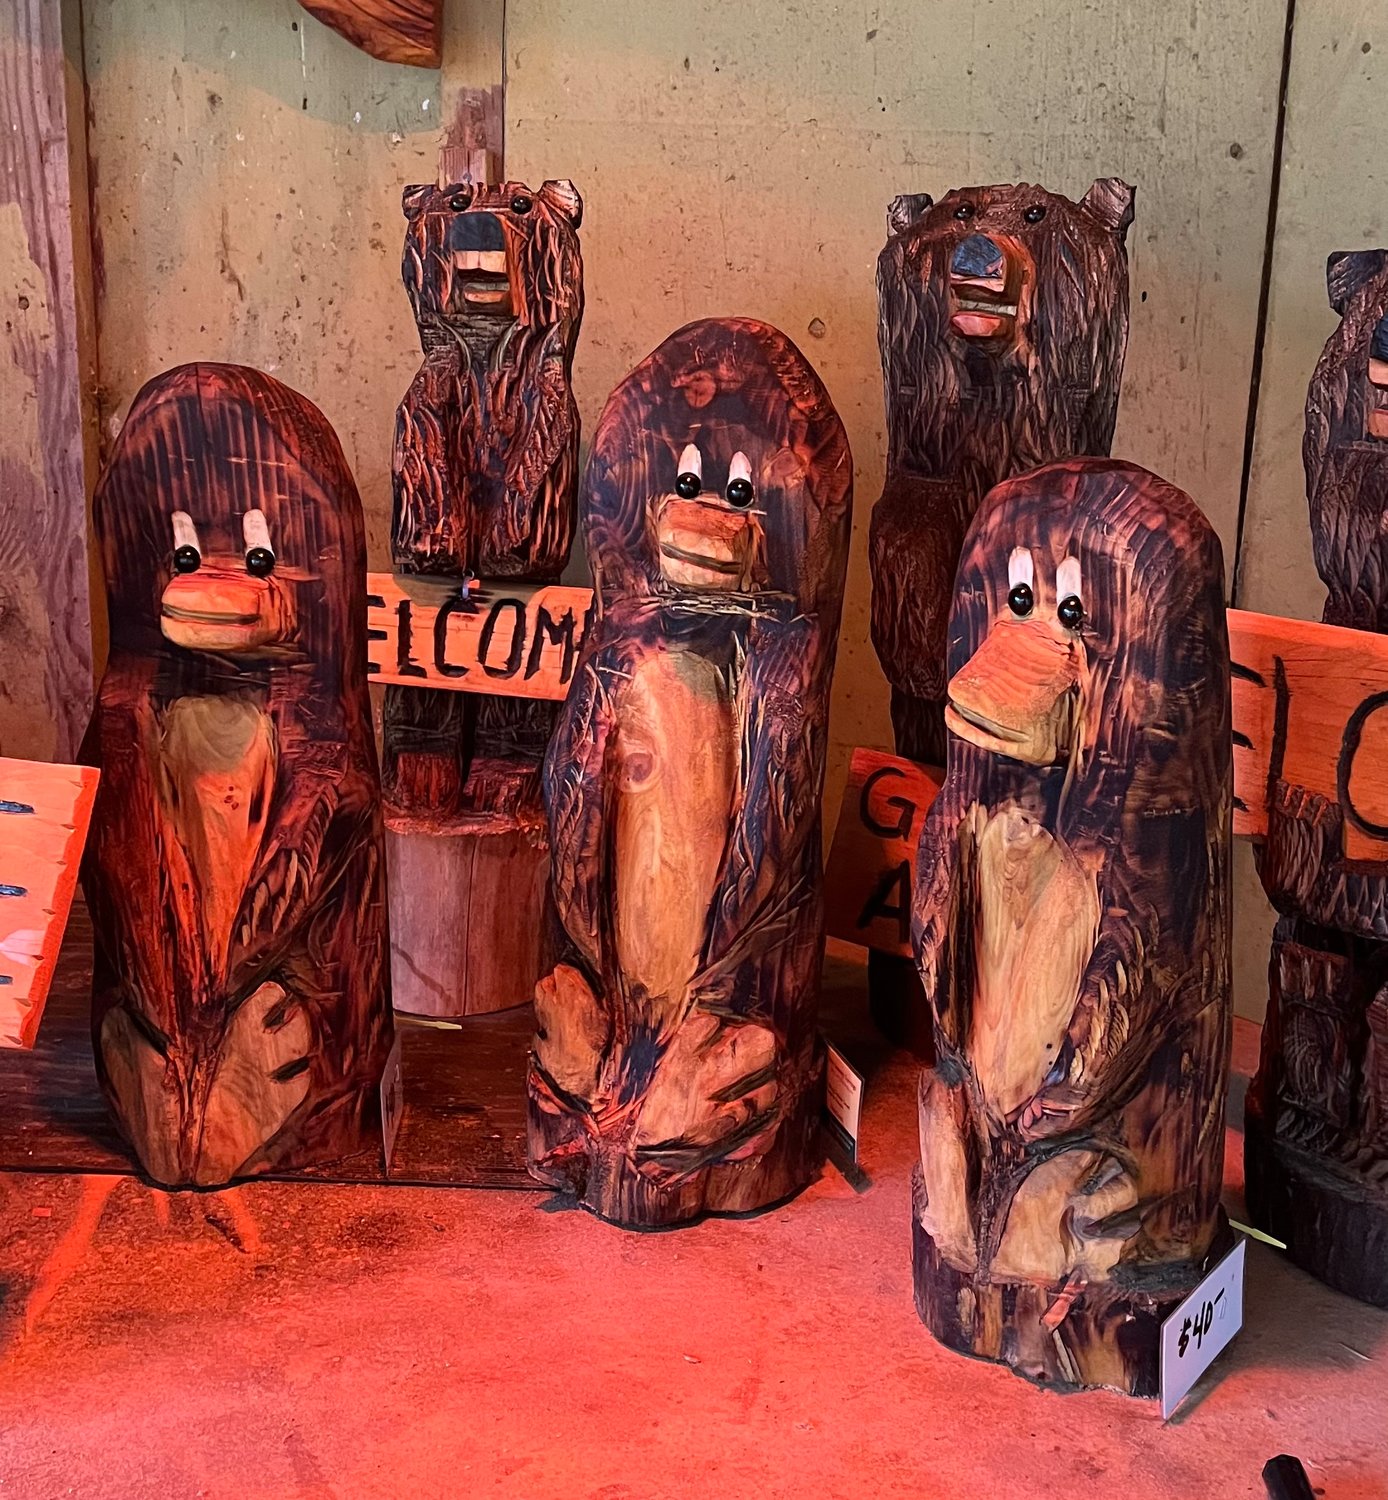 Tracie Zumach’s Yelm Country Carvings is known for its bears, penguins, turtles, eagles, Santas and snowmen.